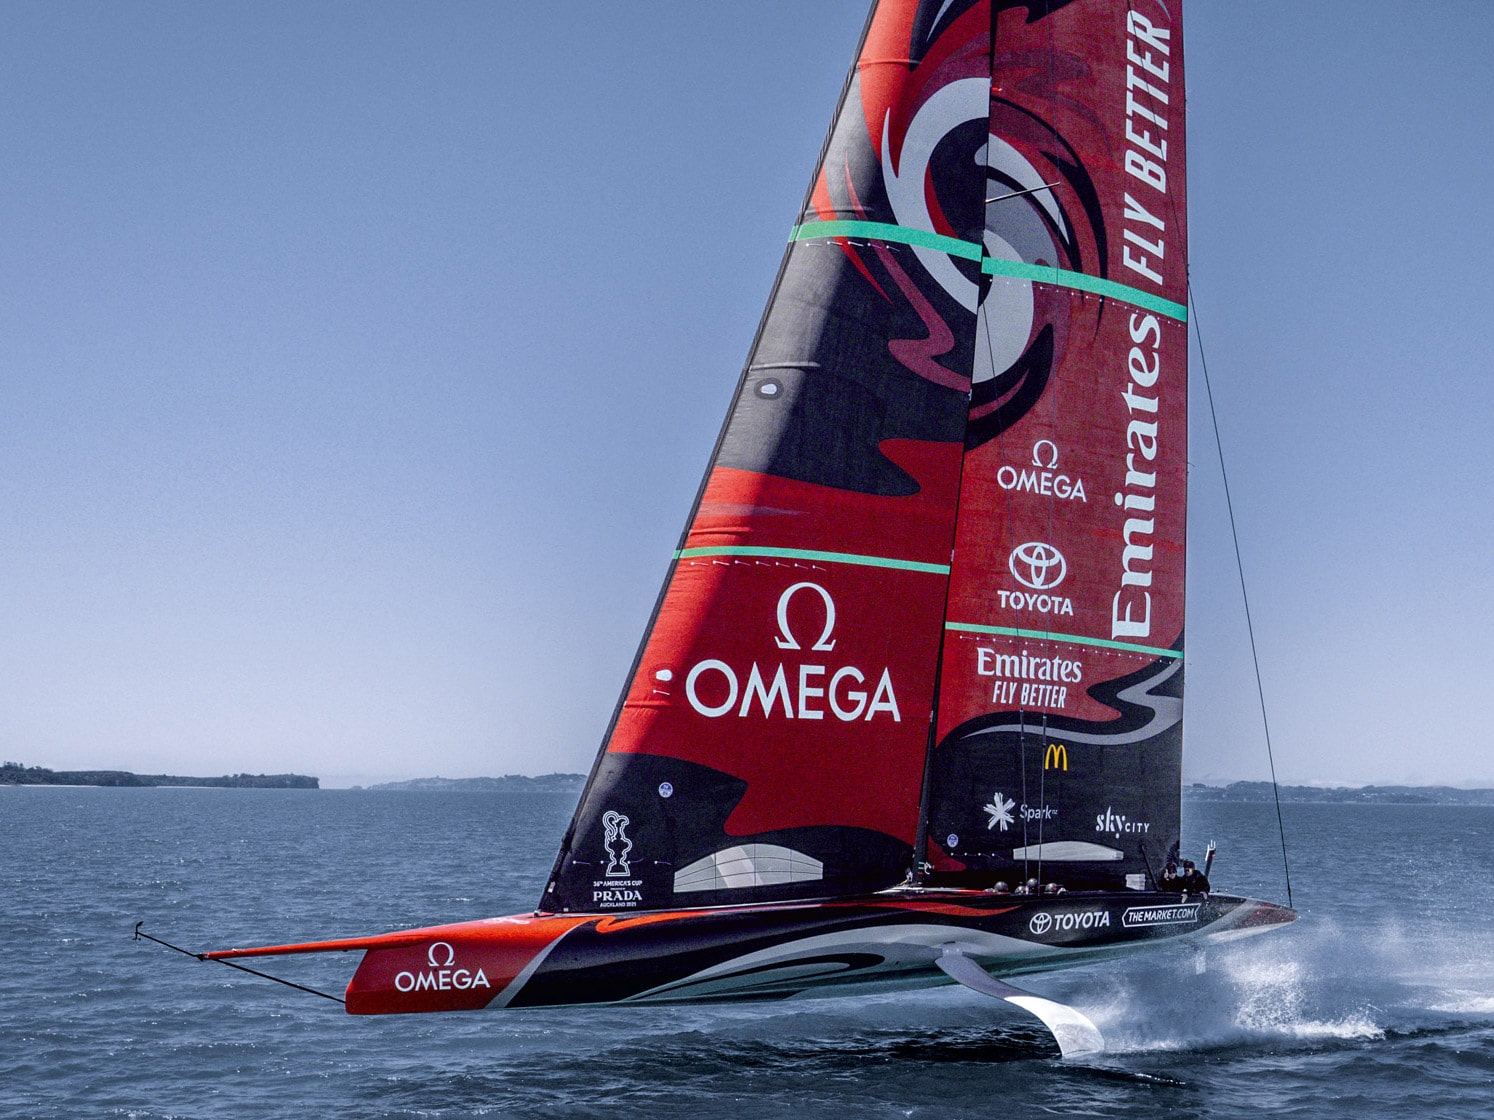 OMEGA Seamaster Planet Ocean 36th America's Cup Announced